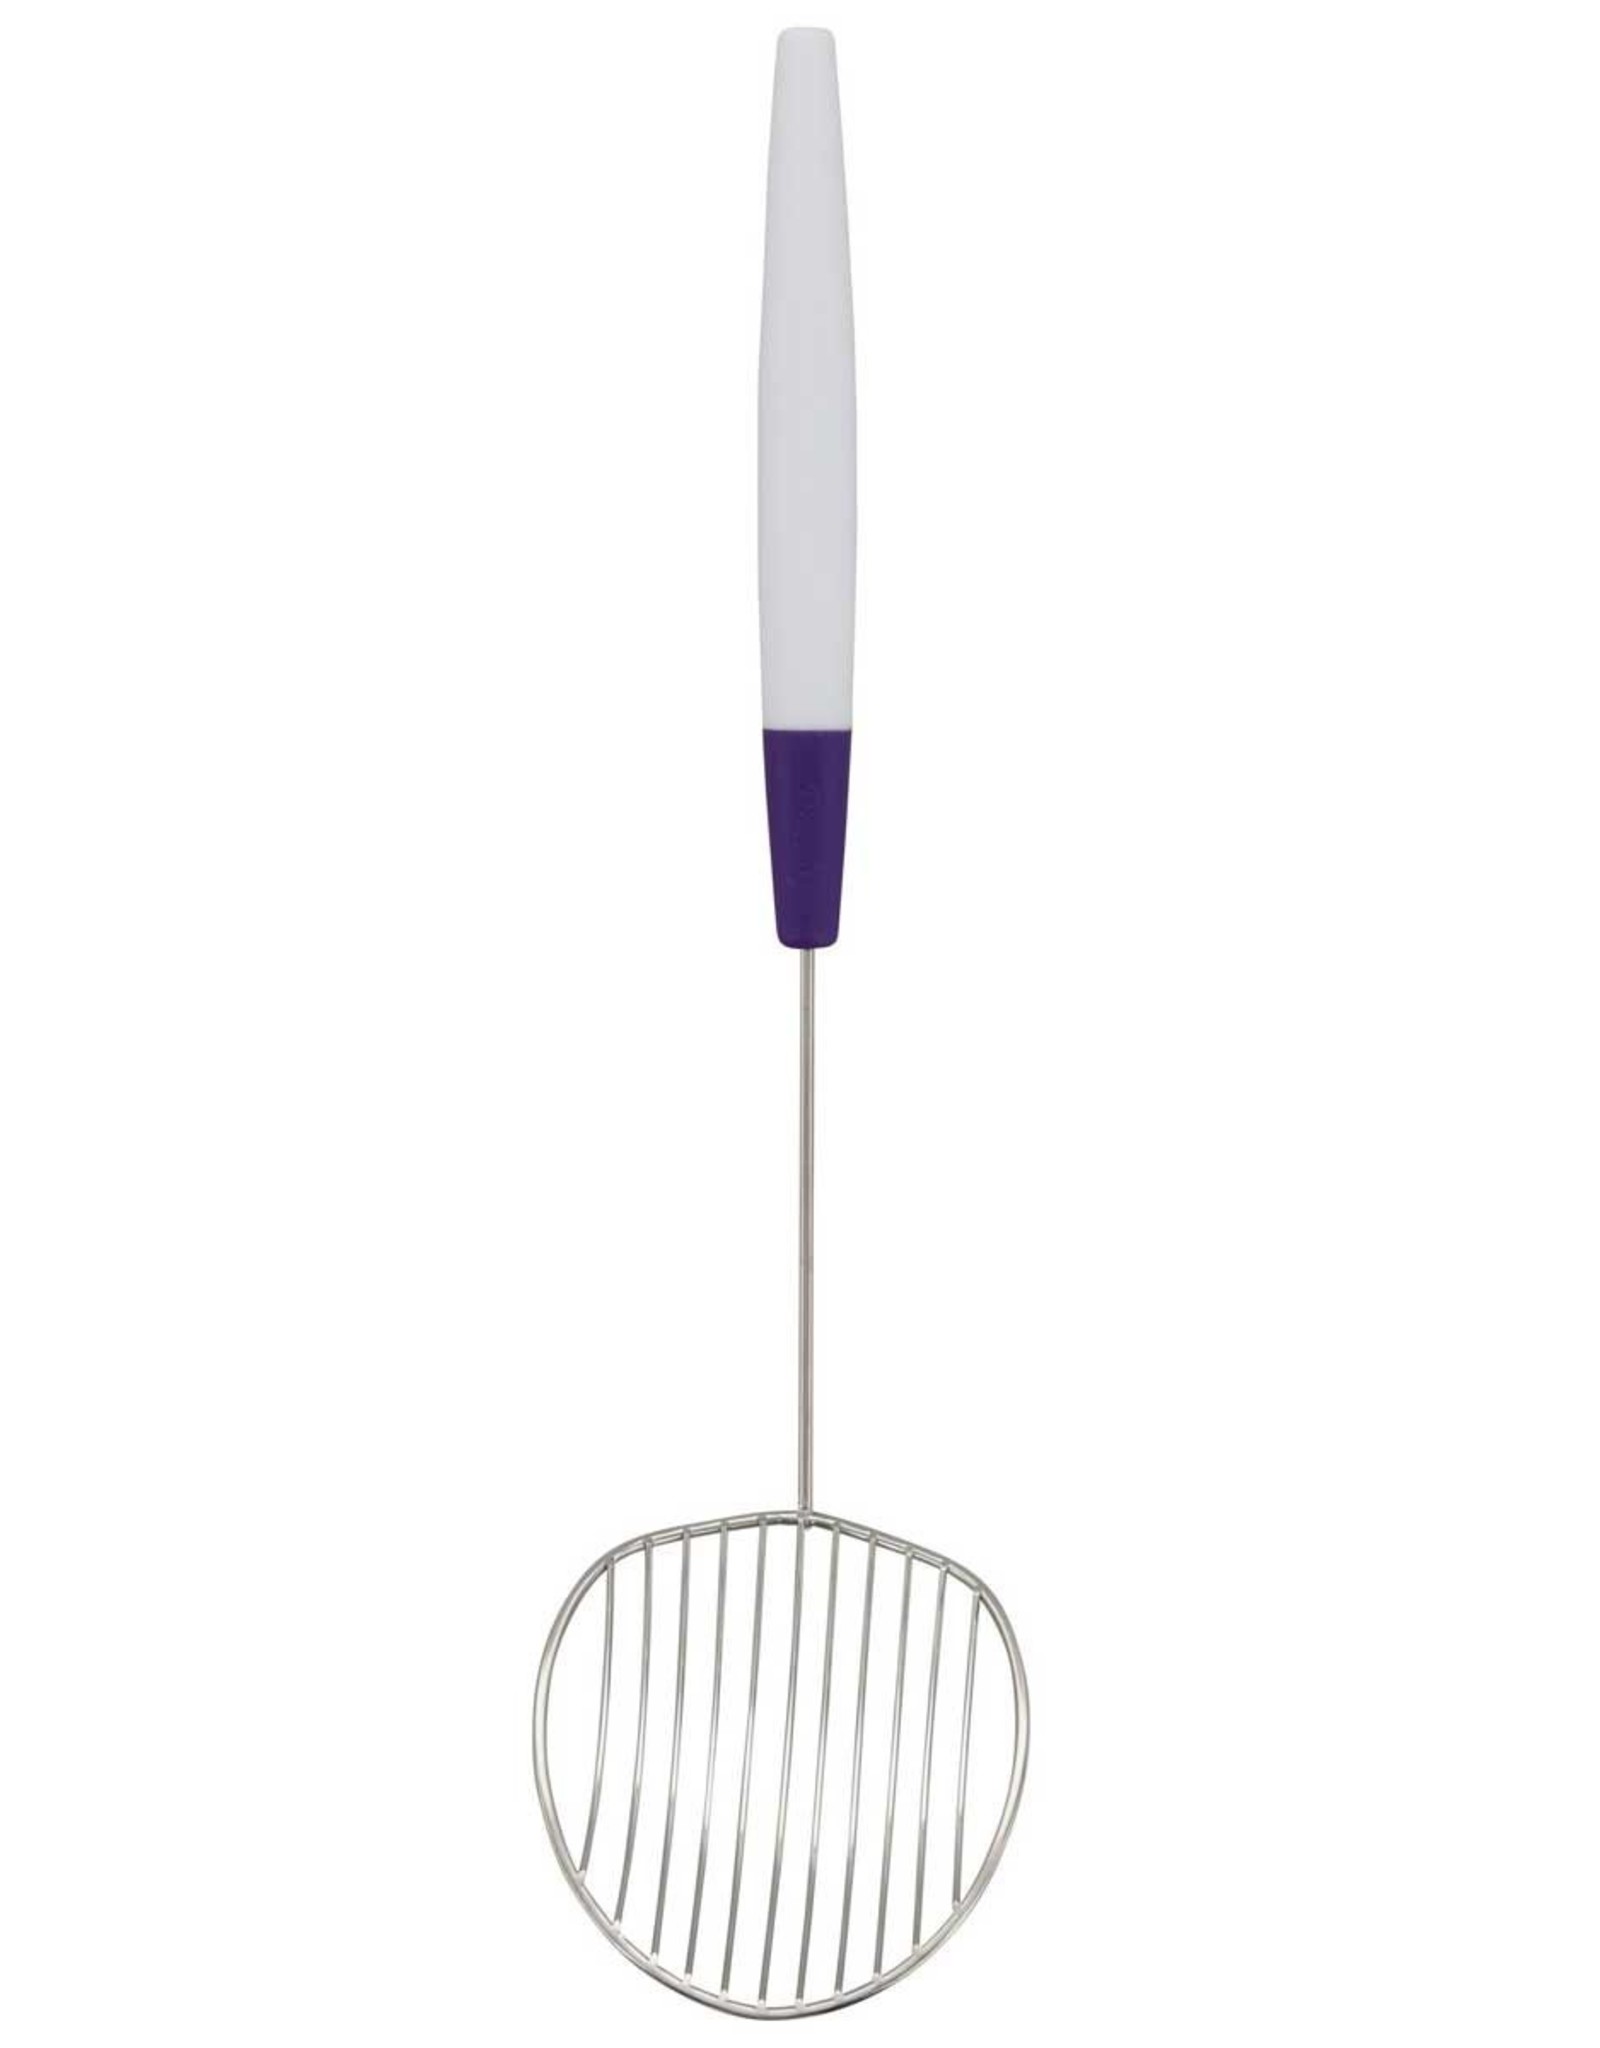 Wilton Wilton Candy Melt Dipping Scoop